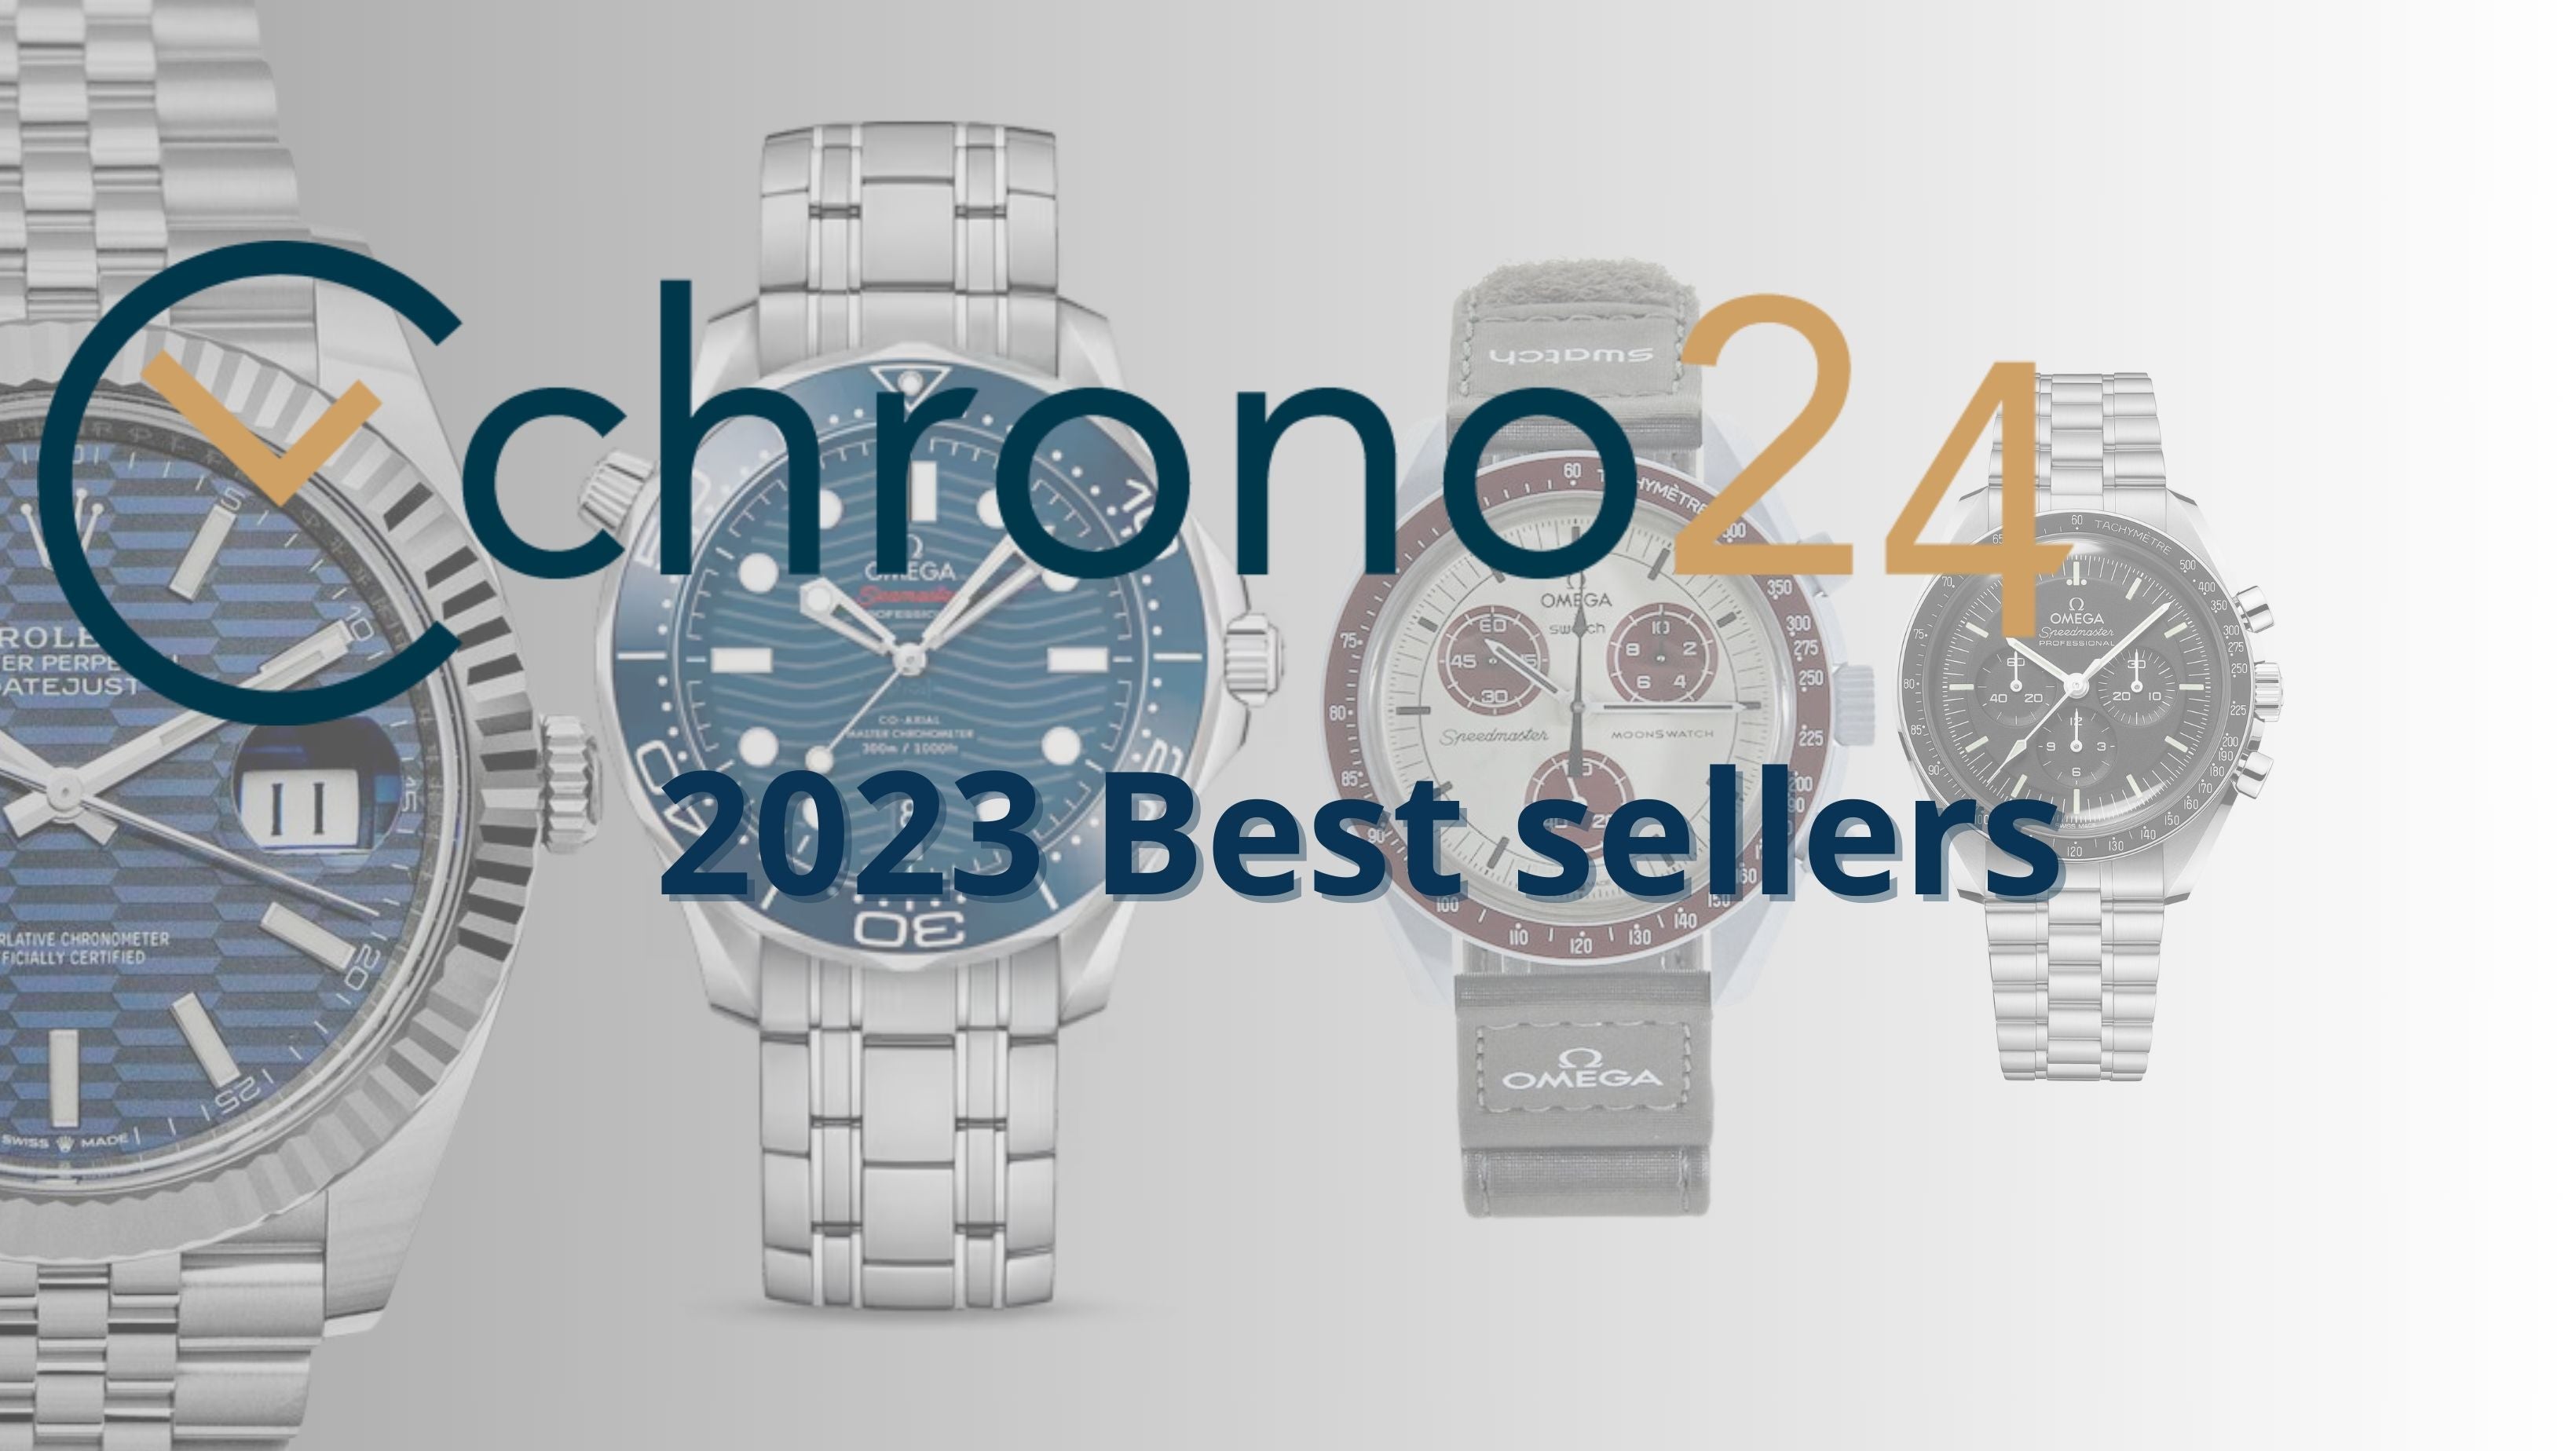 Chrono24 reveals the best-sellers of 2023